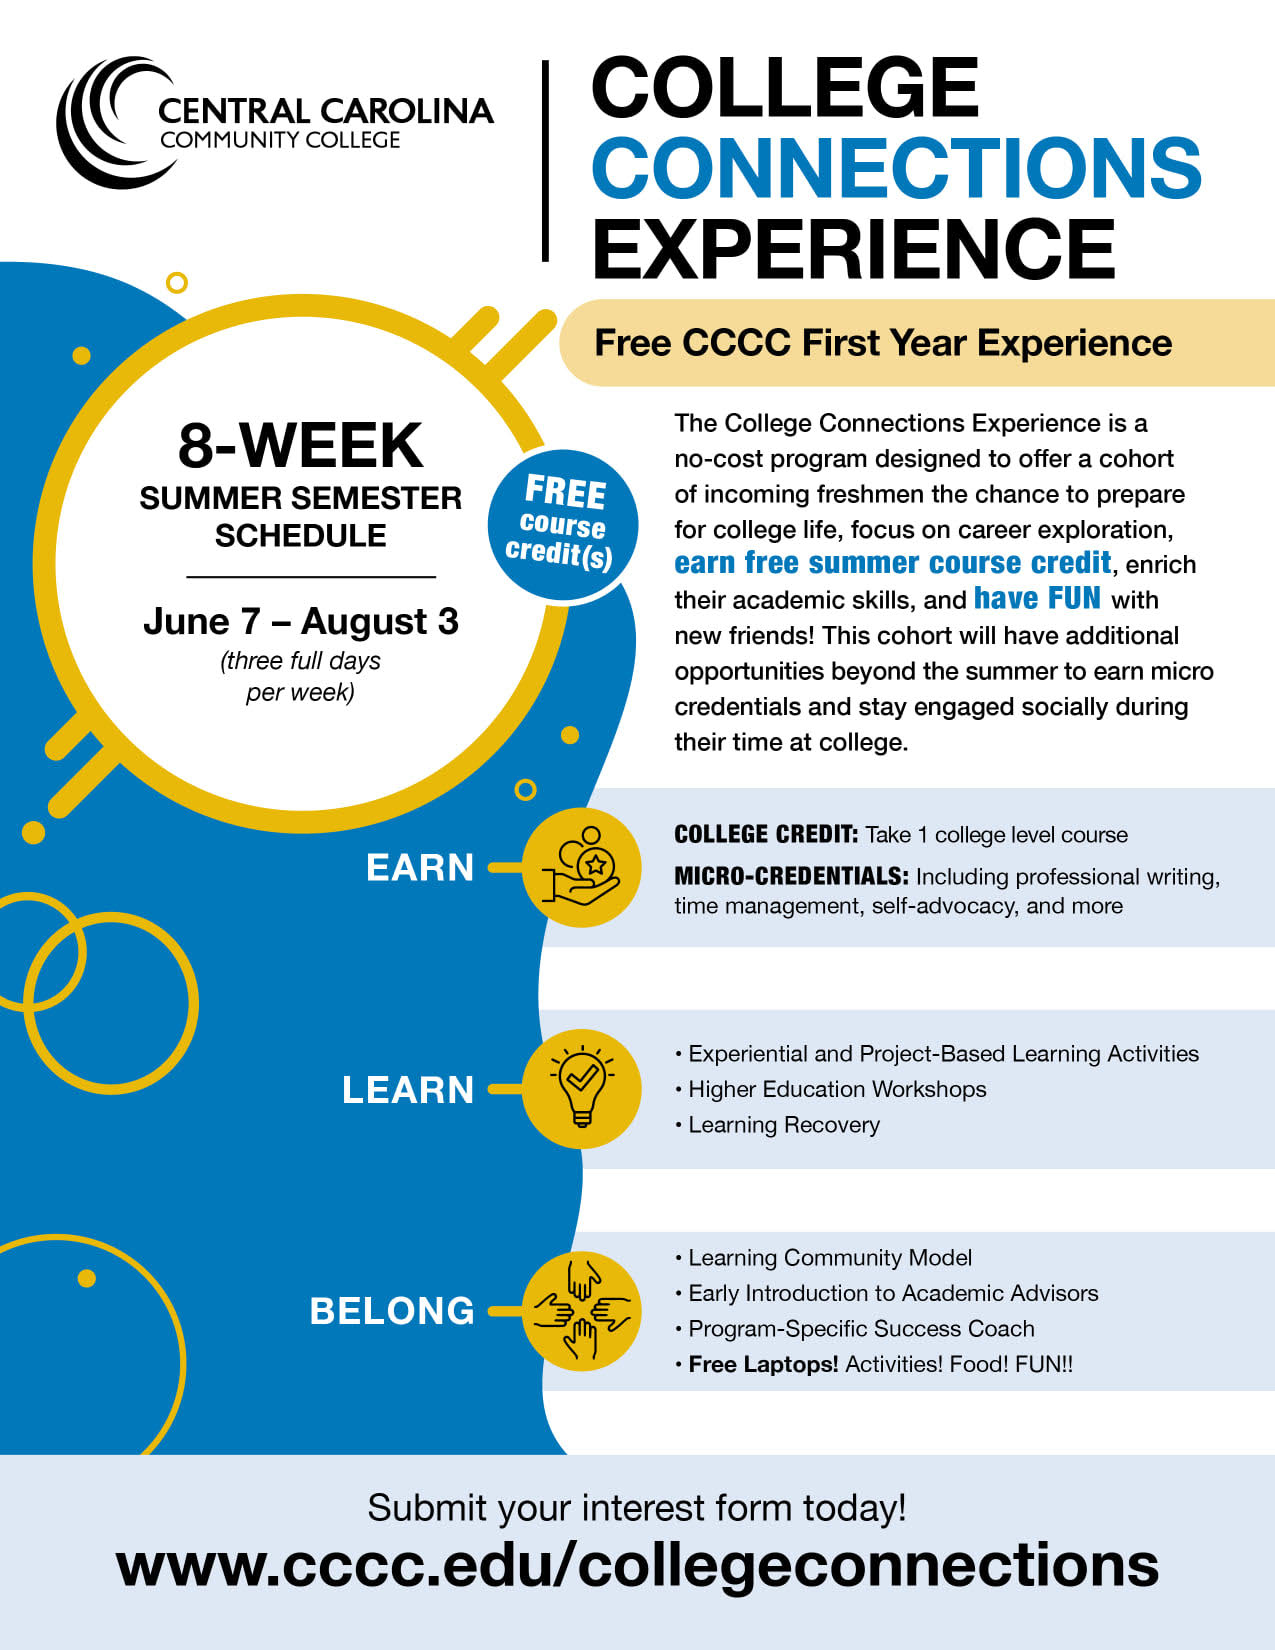 CCCC offers College Connections experience